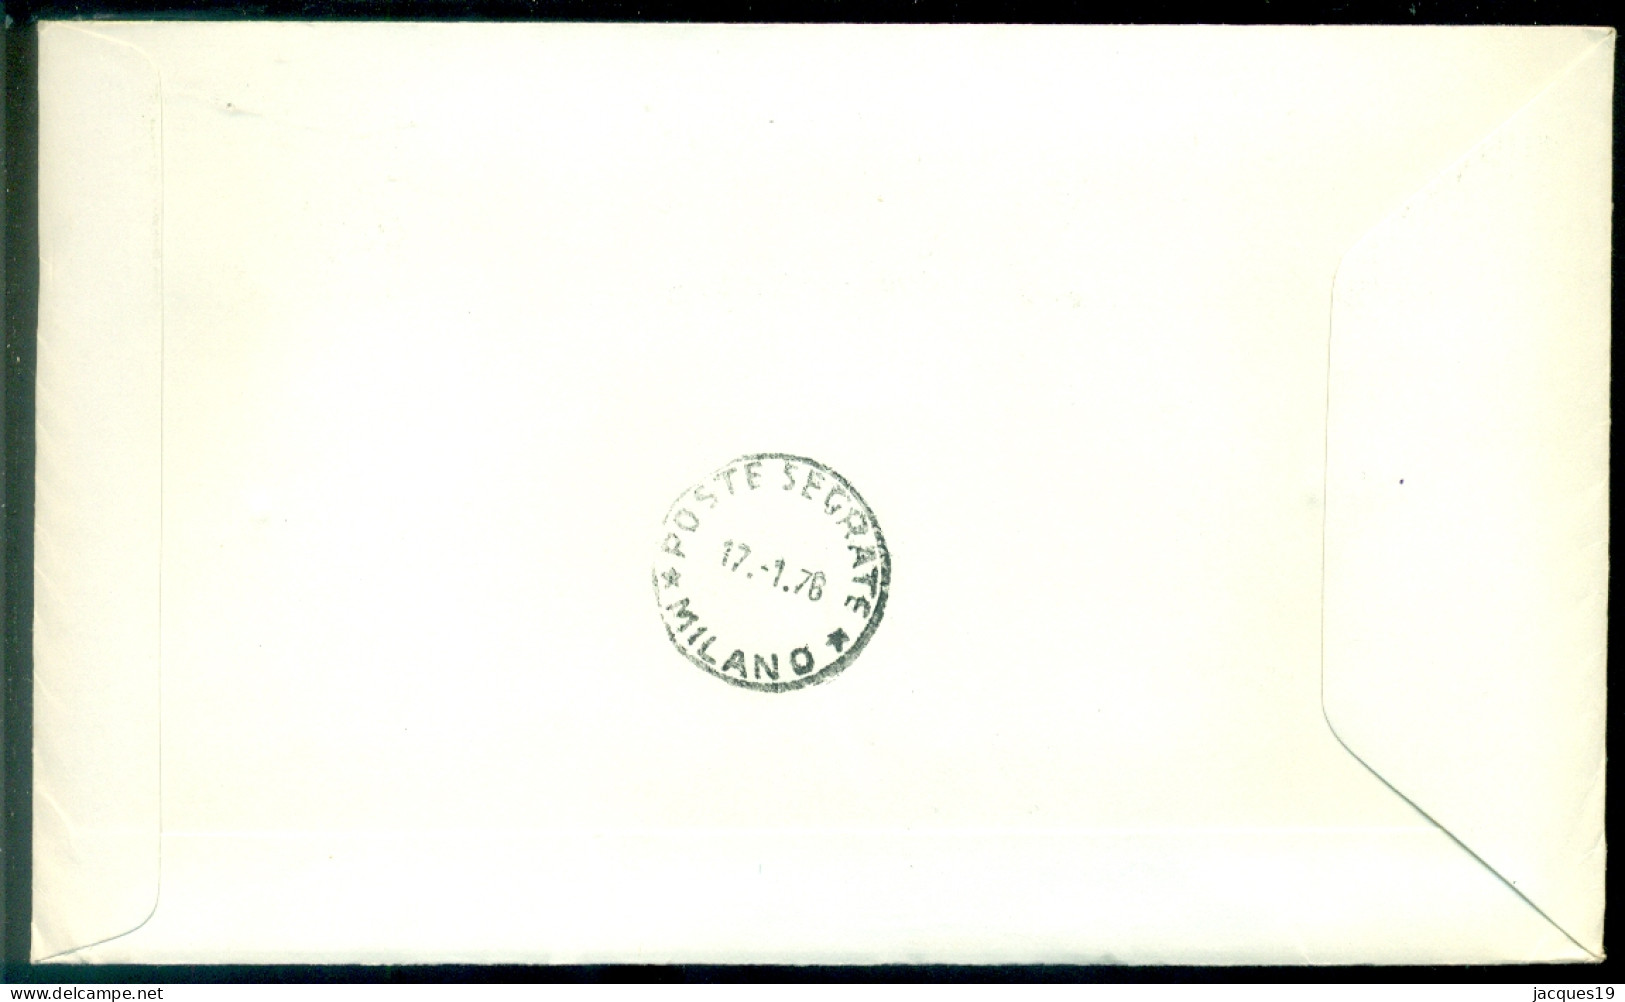 Great Britain 1975 FDC 62nd Inter-Parliamentary Conference - 1971-1980 Decimal Issues